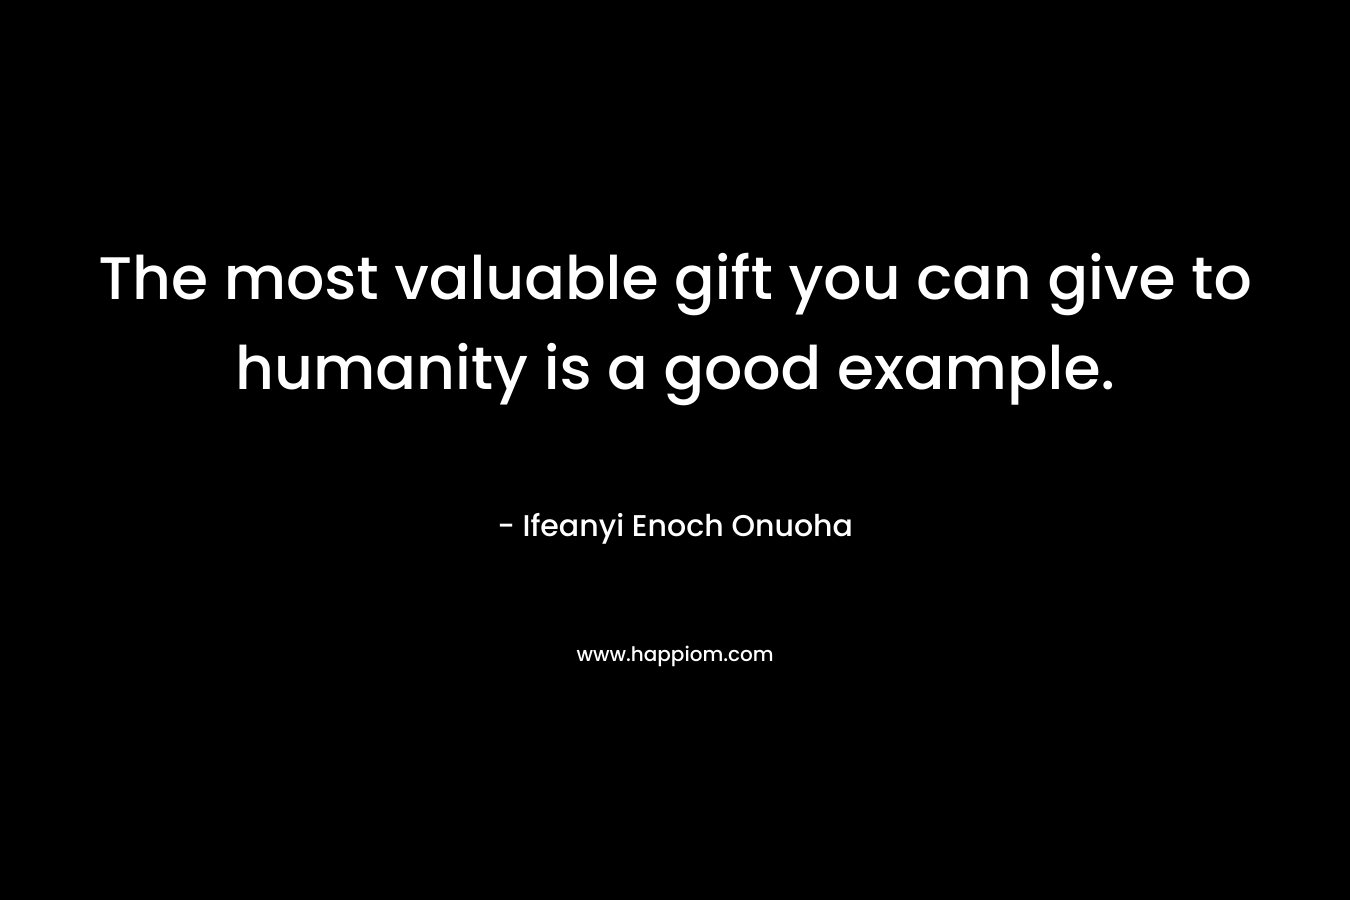 The most valuable gift you can give to humanity is a good example.